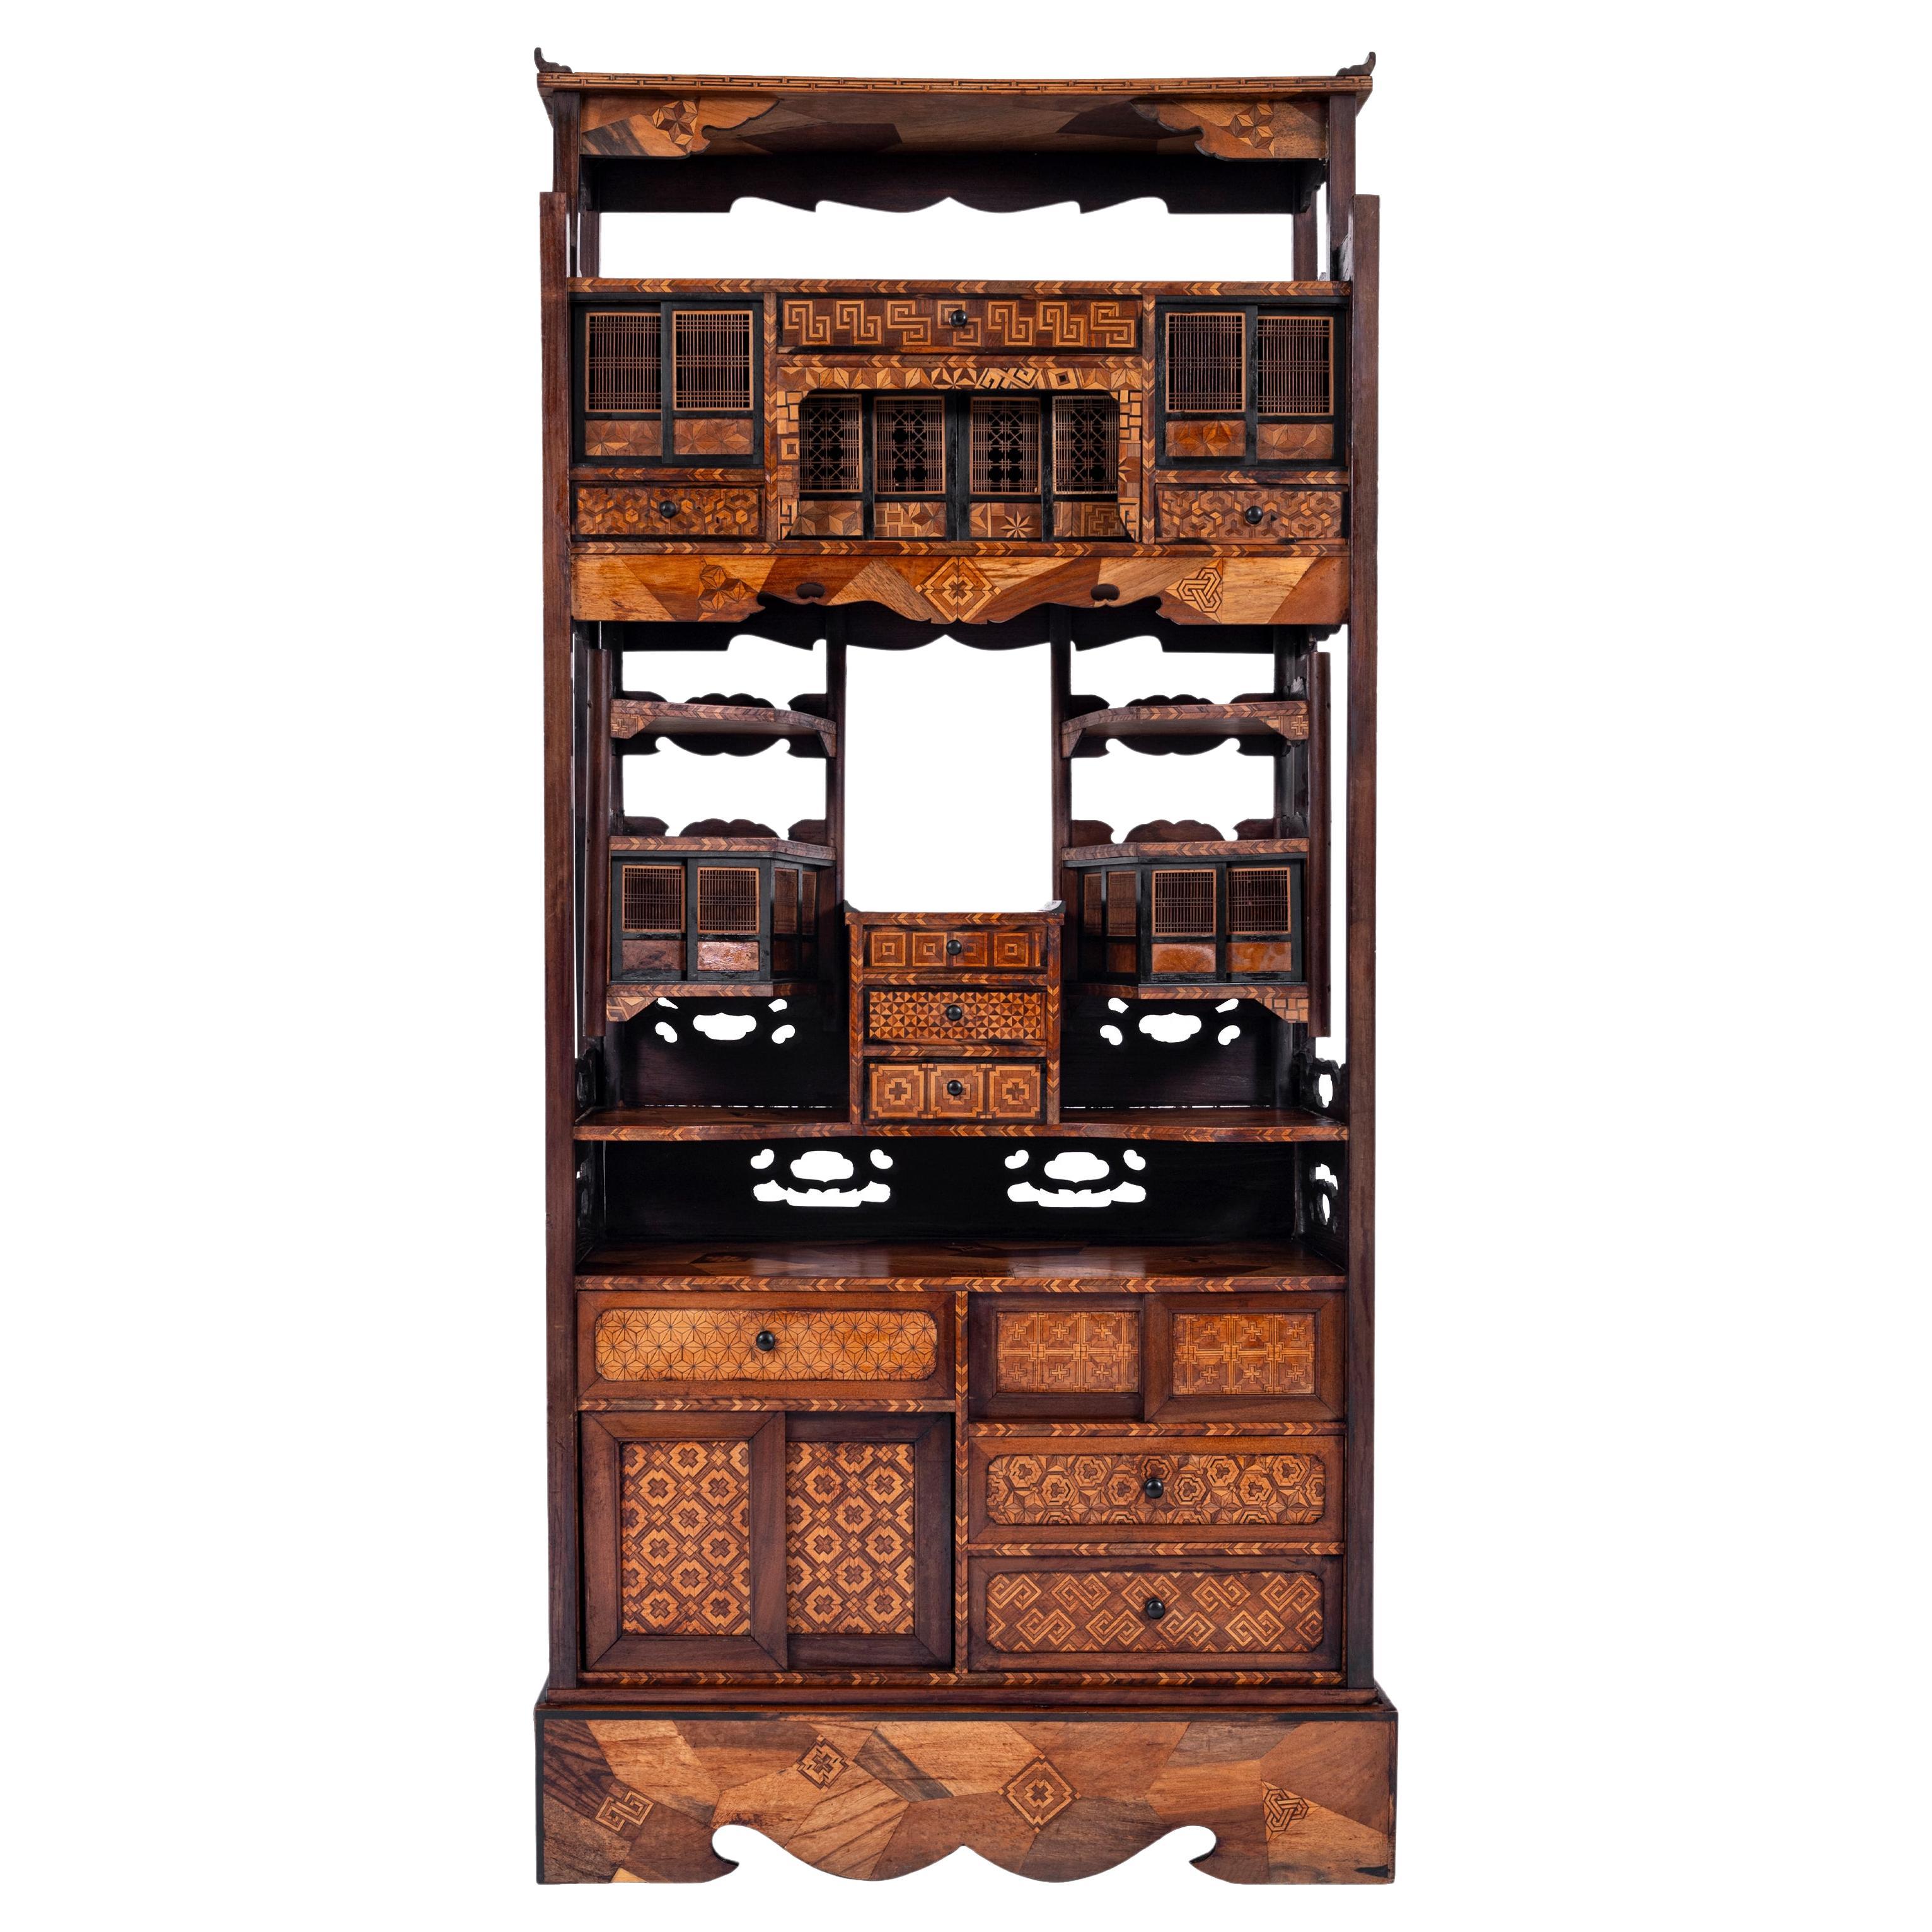 A very fine antique Japanese Meiji period marquetry (Yosegi Zaiku) cabinet/etagere cabinet (Shadona), circa 1880.
The cabinet of unusually large Size; as many of these cabinets are much smaller and often this style of Japanese marquetry was used on